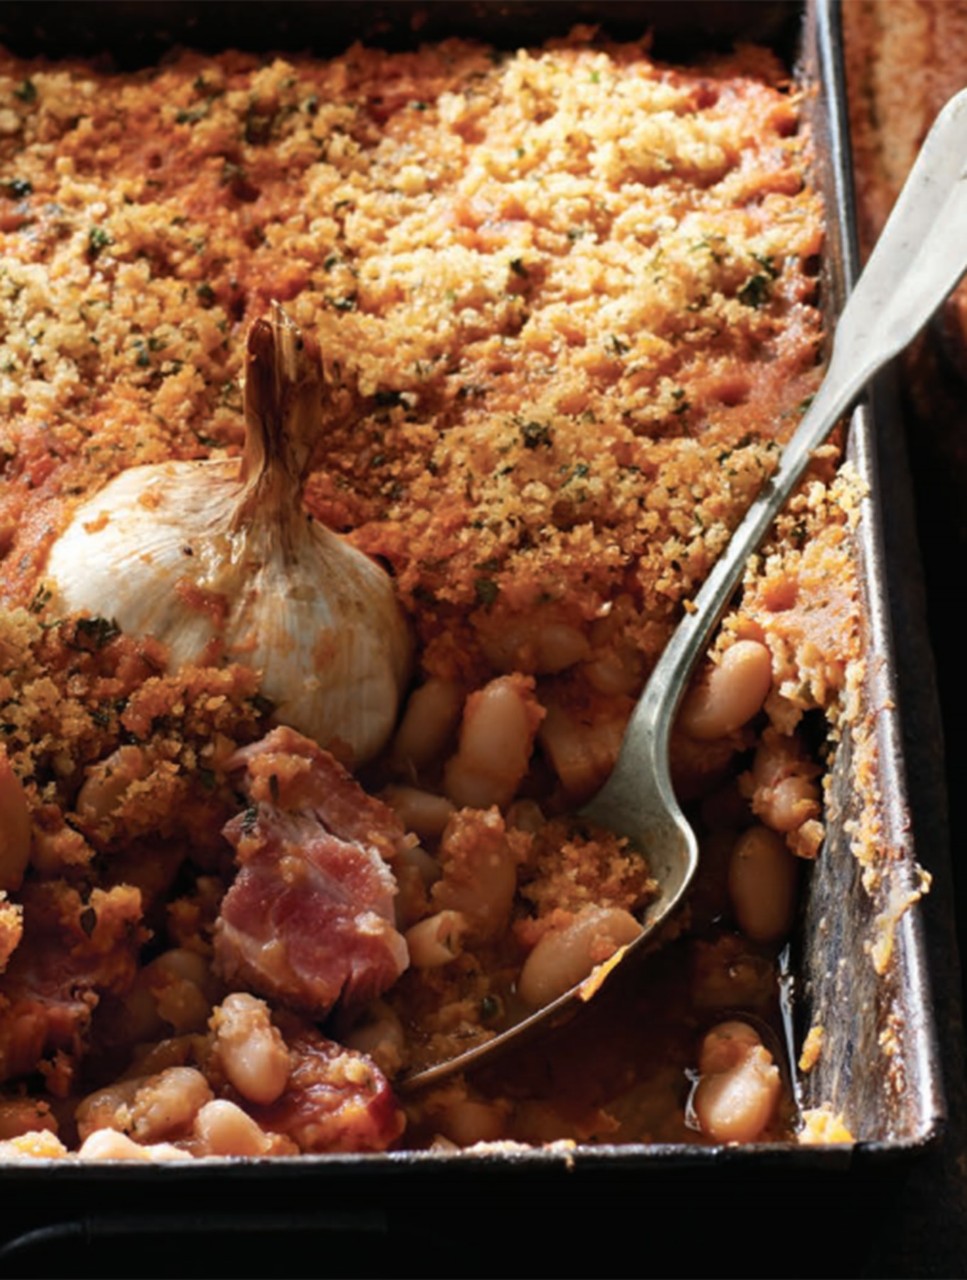 Cassoulet-Style Baked Beans with Bacon & Garlic